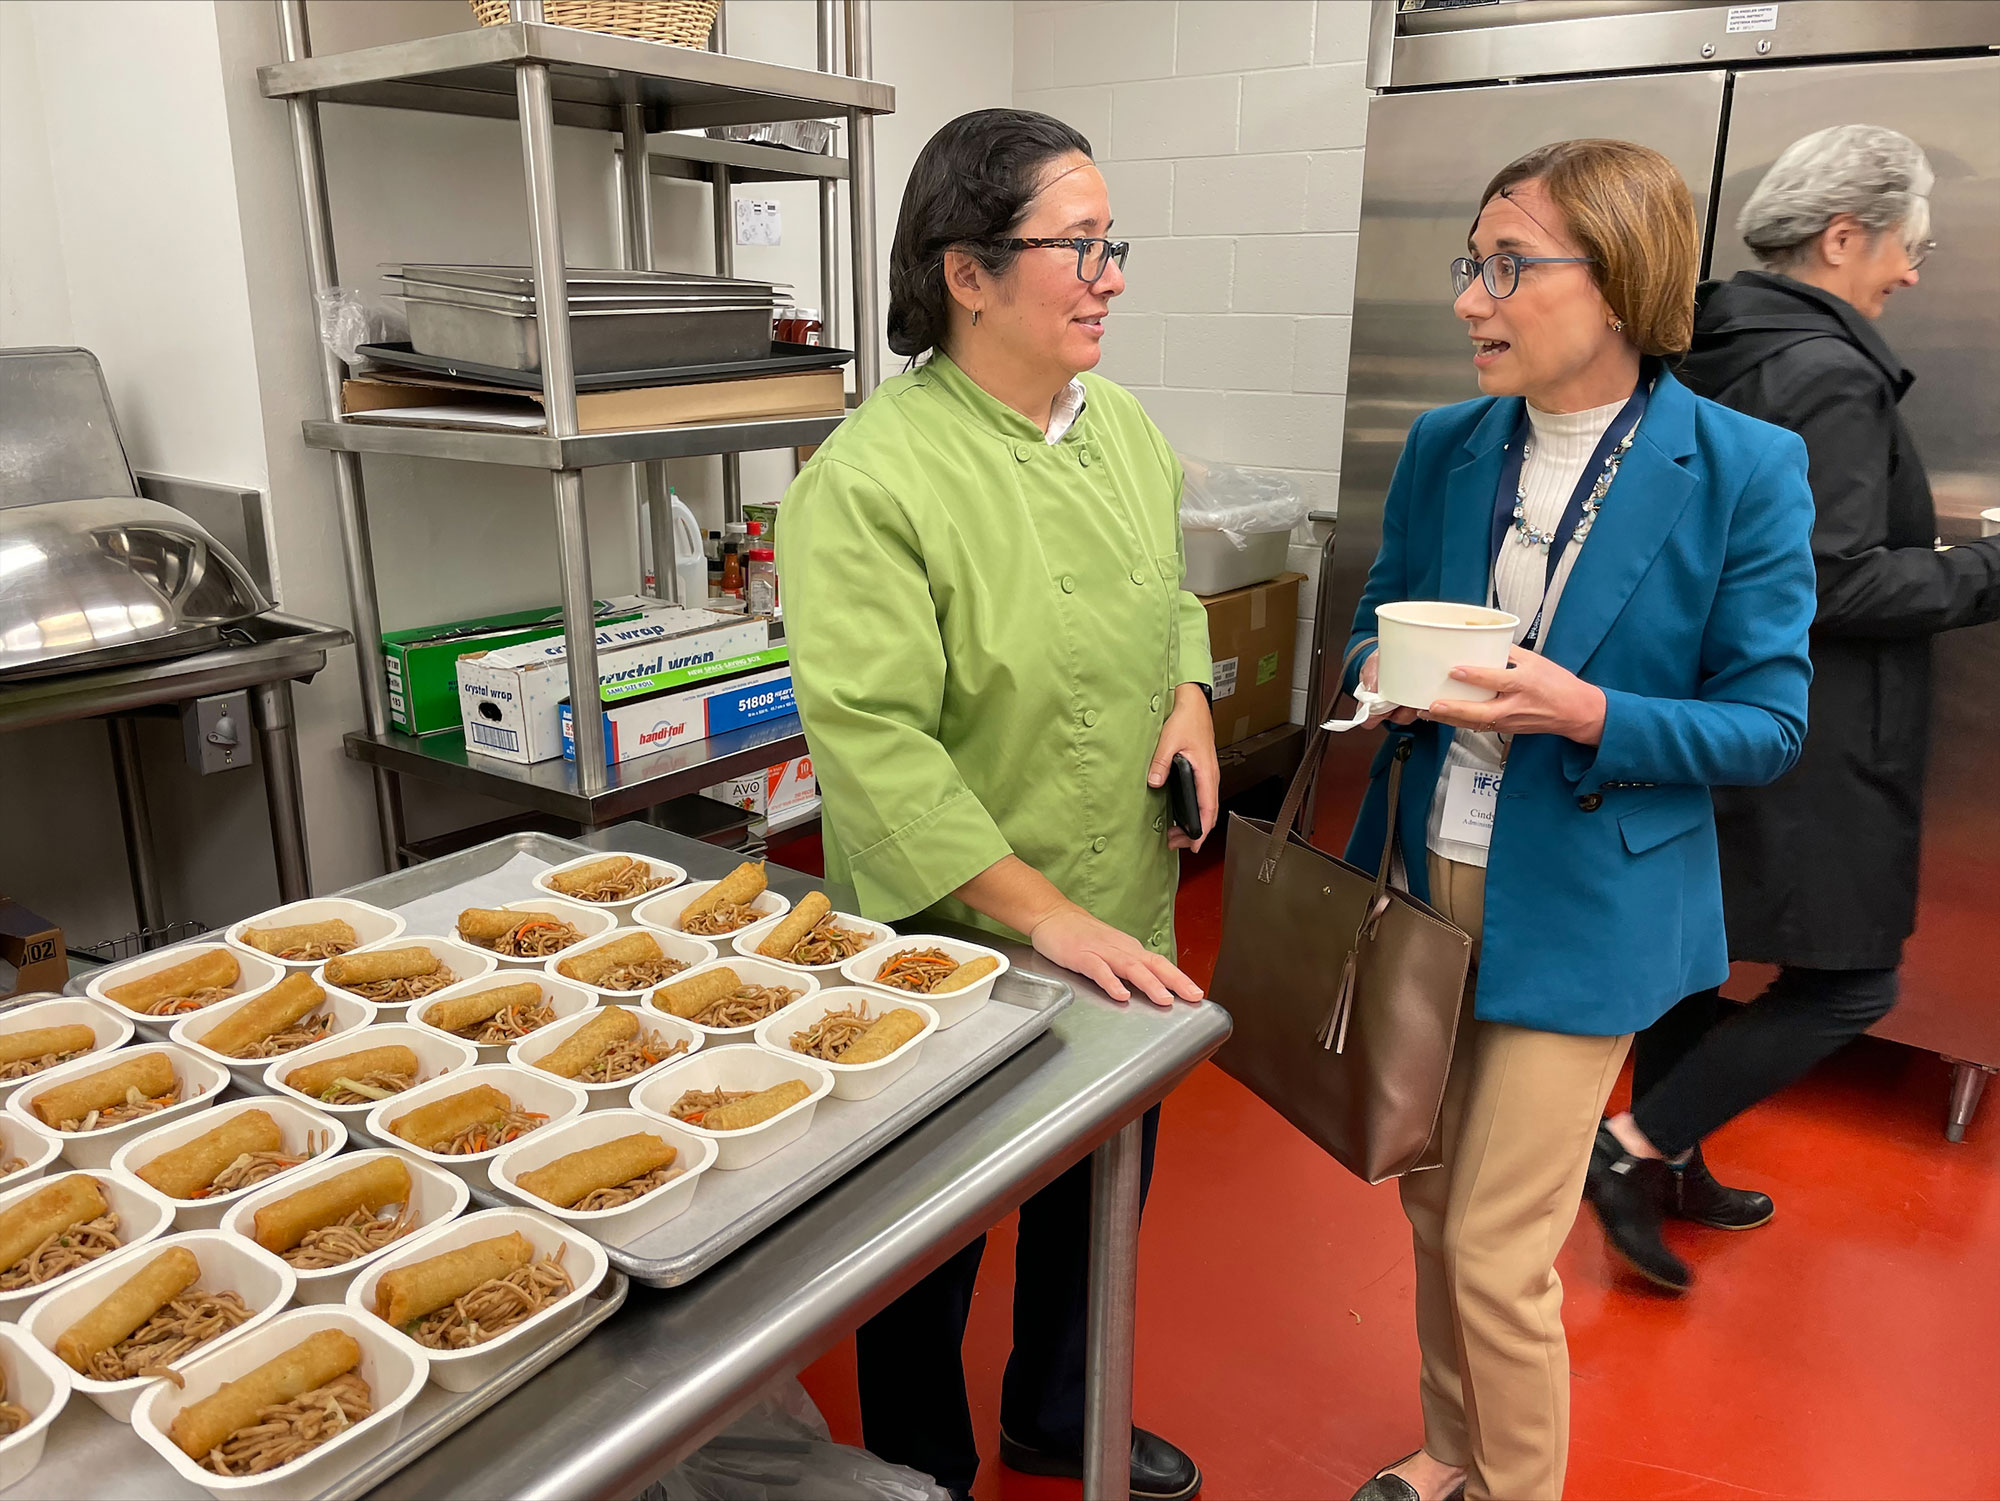 FNS Administrator Cindy Long speaks with Los Angeles Unified School District staff inside a school kitchen in Los Angeles, California